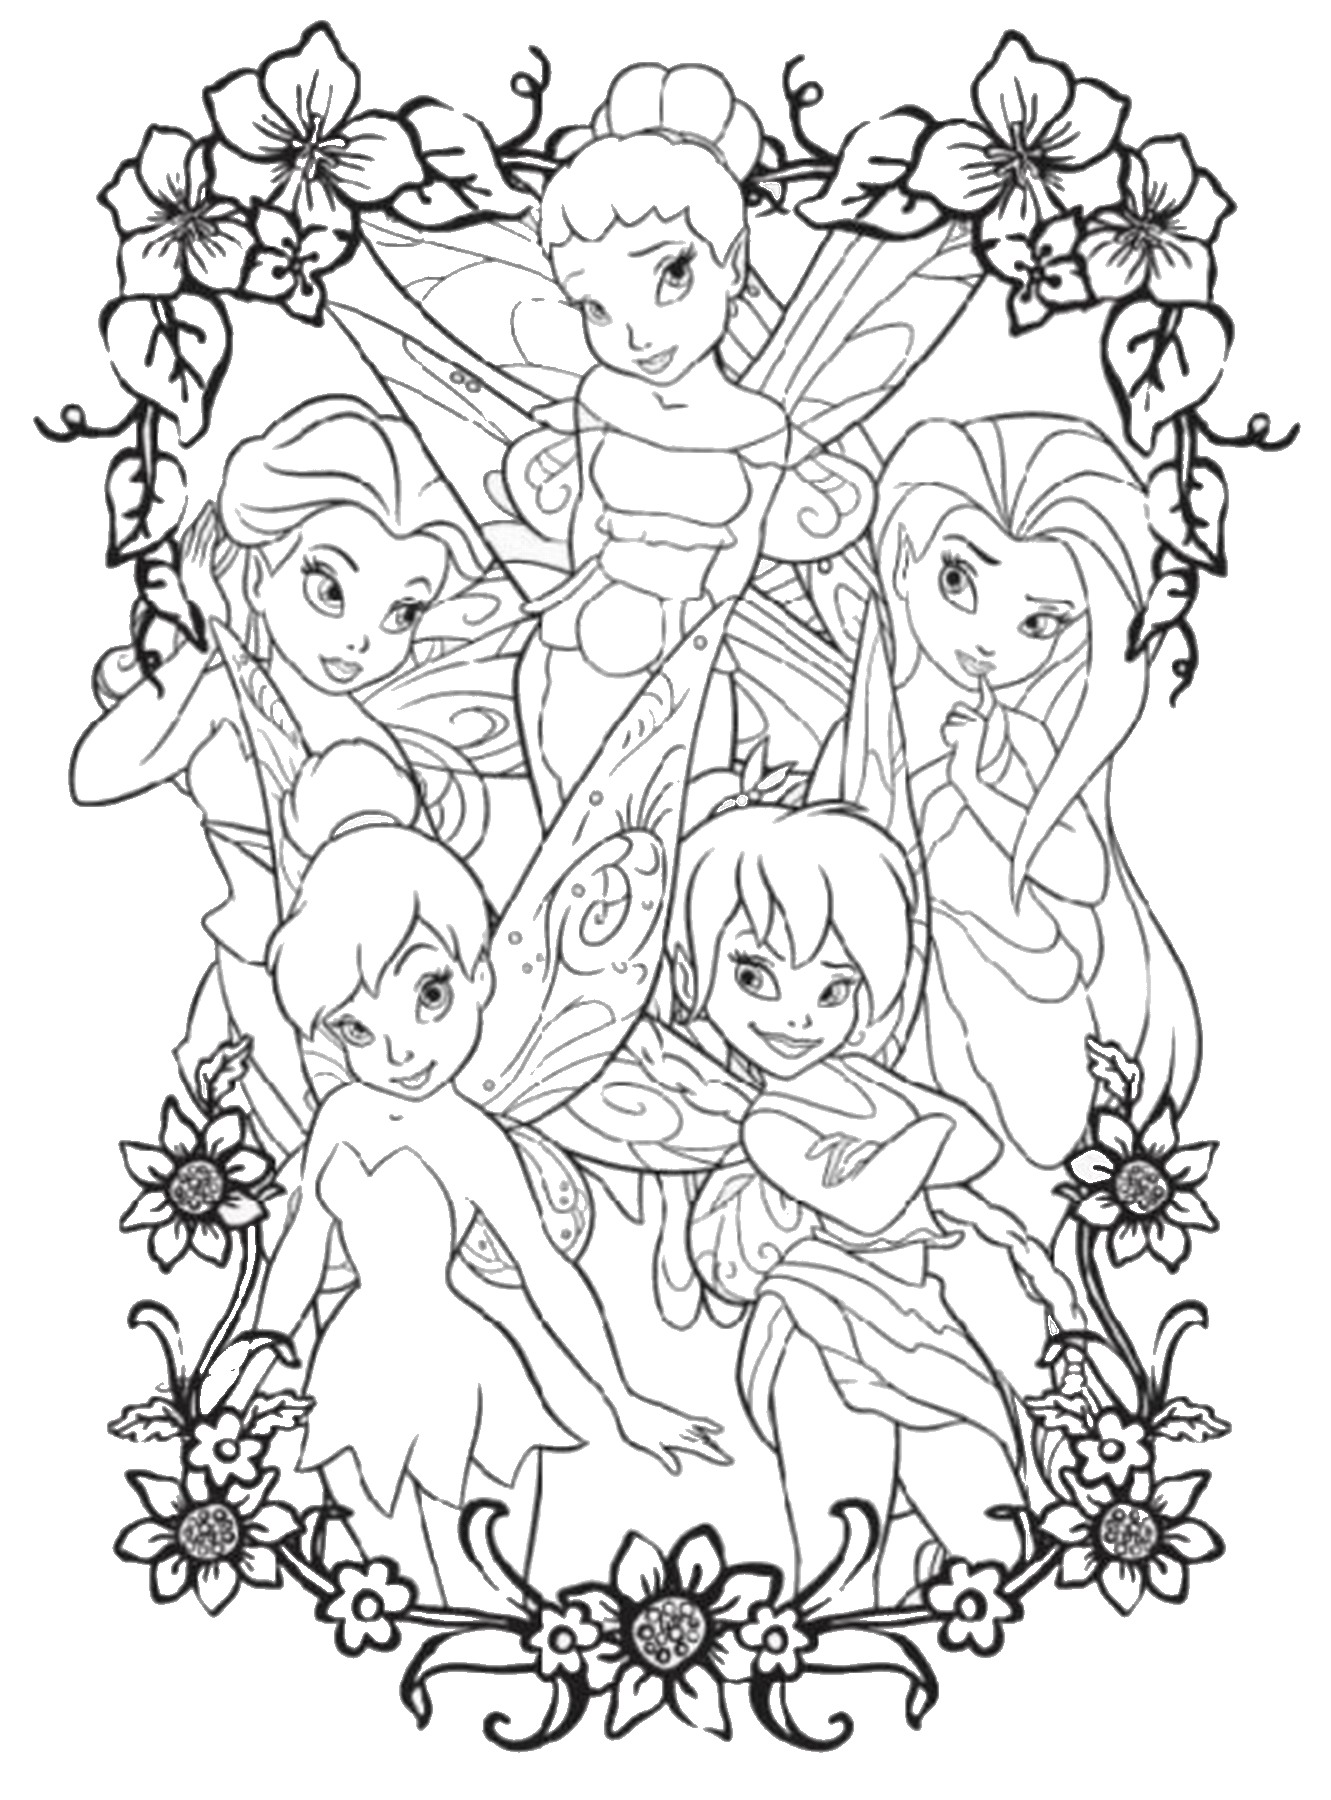 tinkerbell coloring 30 tinkerbell coloring pages free coloring pages free tinkerbell coloring 1 1